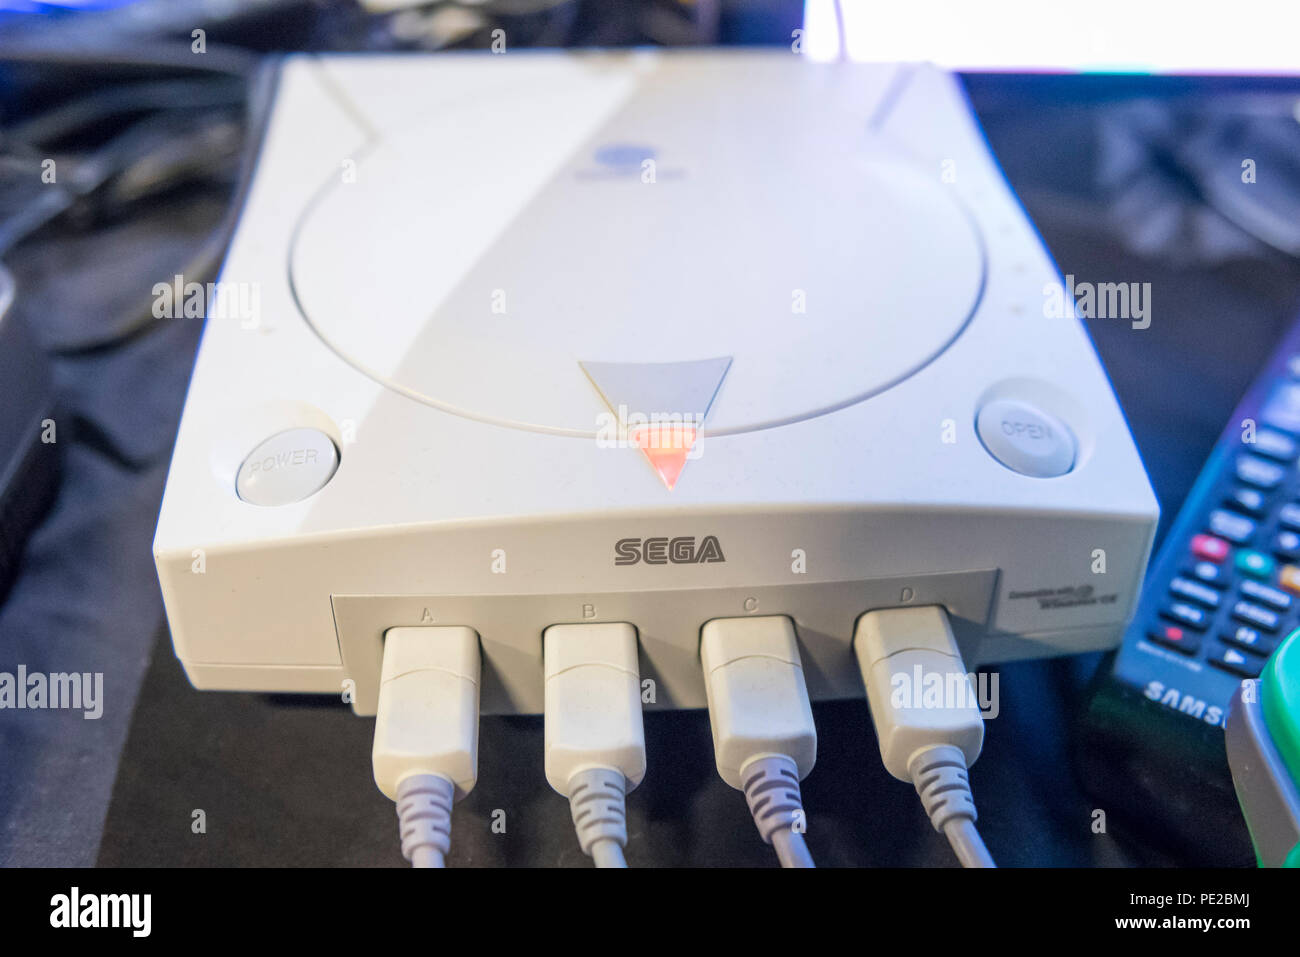 London, UK.  12 August 2018. A Sega Dreamcast console at retro games festival PLAY Expo held in London for the first time at Printworks, Canada Water. Game enthusiasts visited to rediscover the classics, from Donkey Kong, Pong, Super Mario Bros. and Space Invaders to vintage pinball machines, VR, indie games and a dedicated Minecraft zone. The show also included a sneak preview of new retro gaming streaming service, Antstream.  Credit: Stephen Chung / Alamy Live News Stock Photo